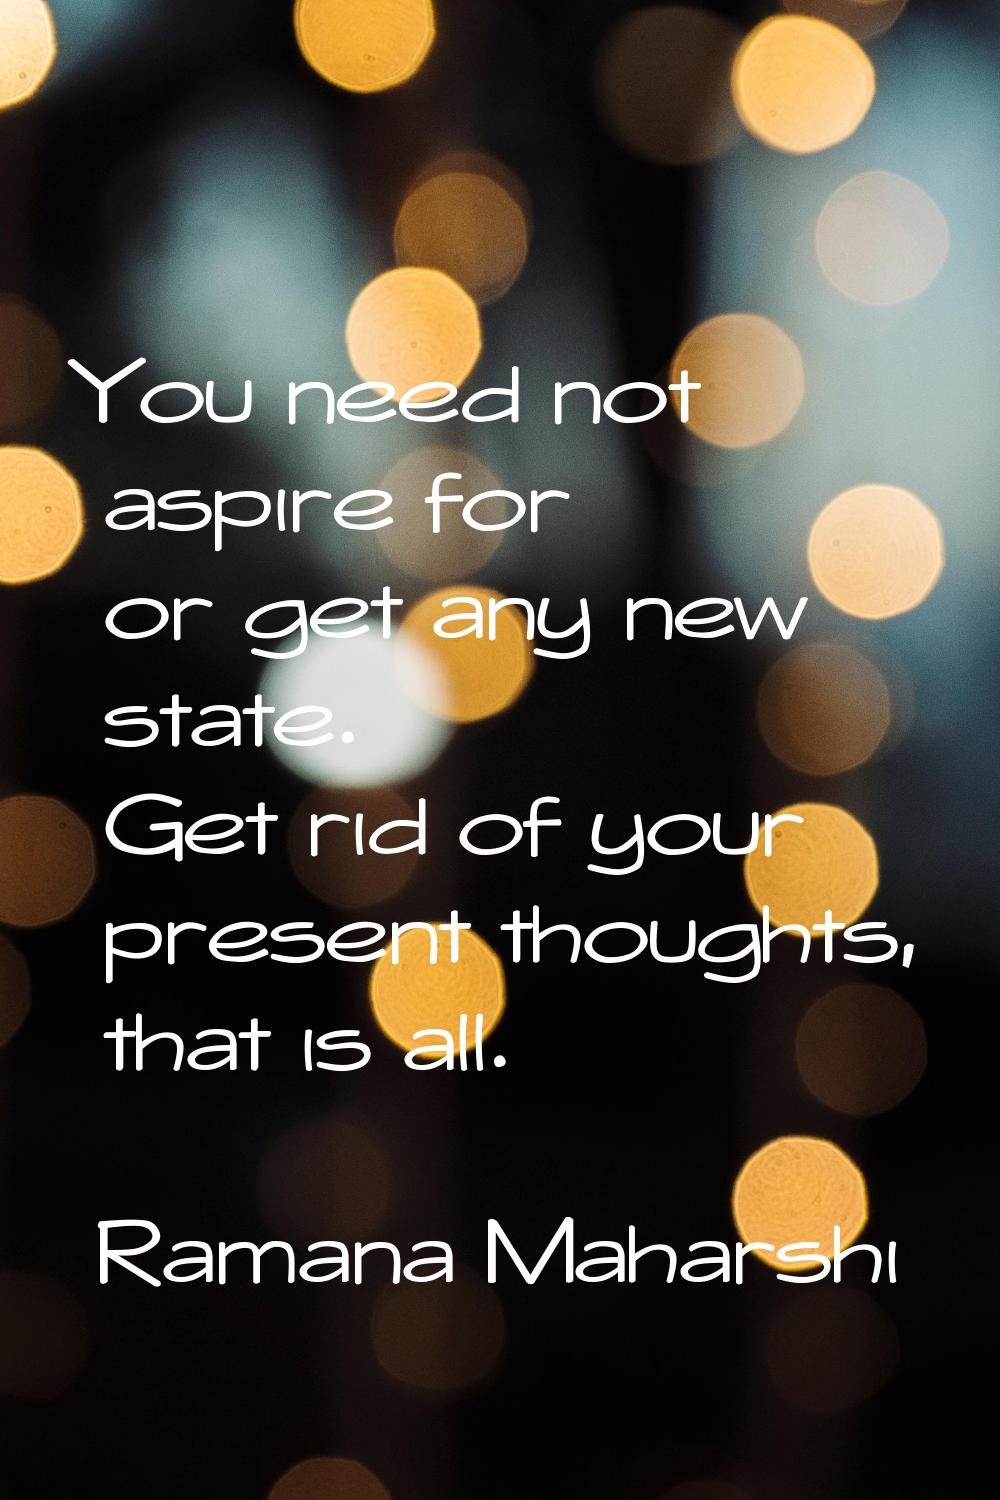 You need not aspire for or get any new state. Get rid of your present thoughts, that is all.